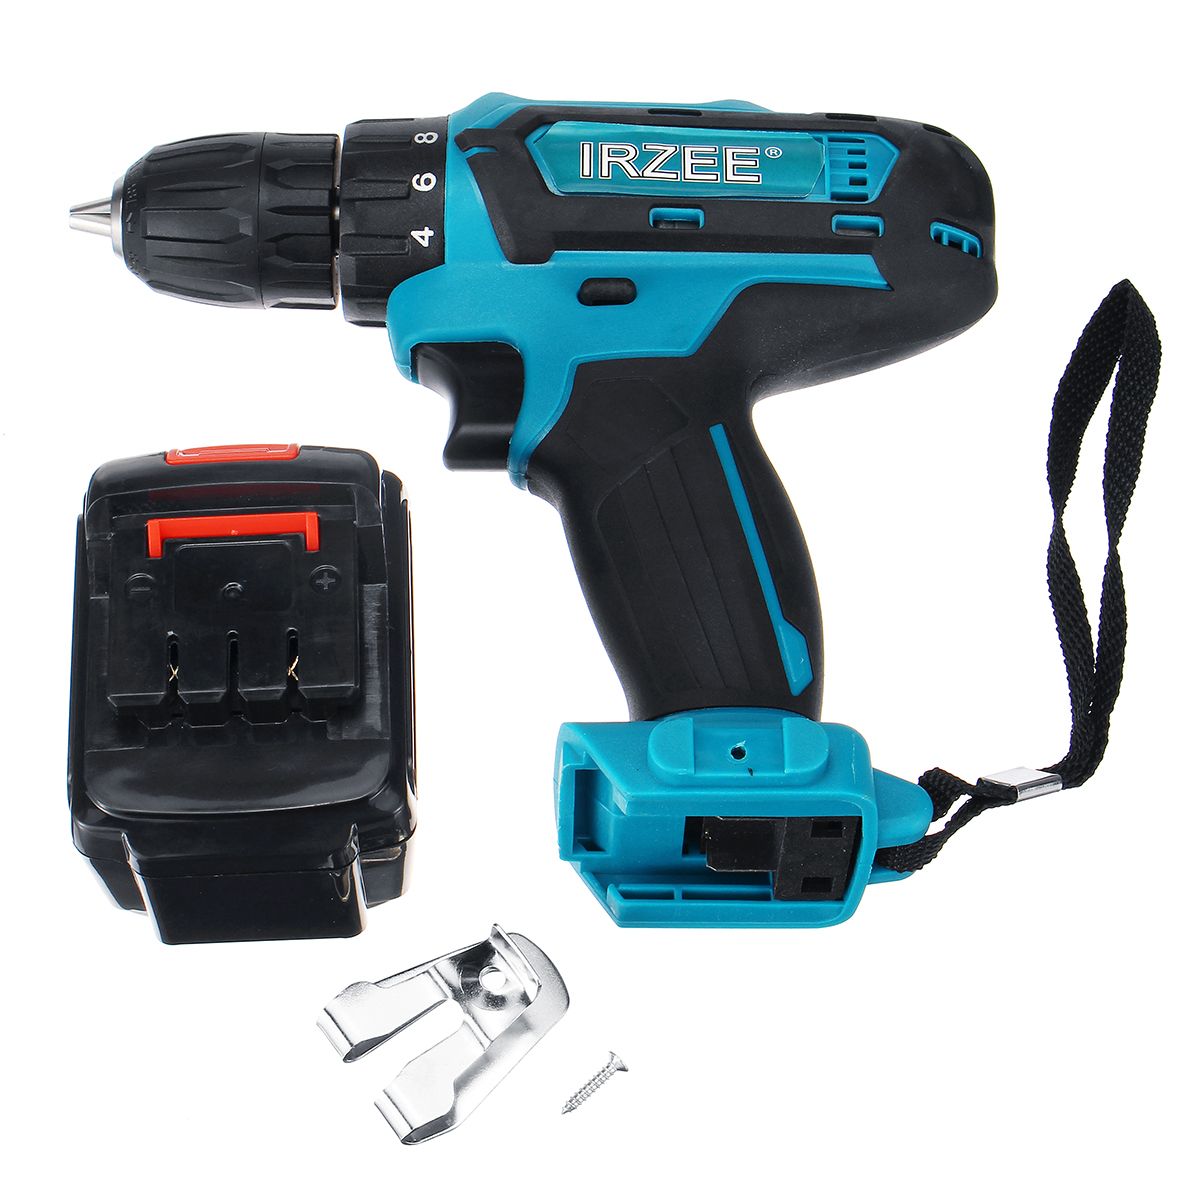 26V-Electric-Cordless-Drill-Power-Drills-253-Stage-Lithium-Battery-Drilling-Tools-With-12-Battery-1460499